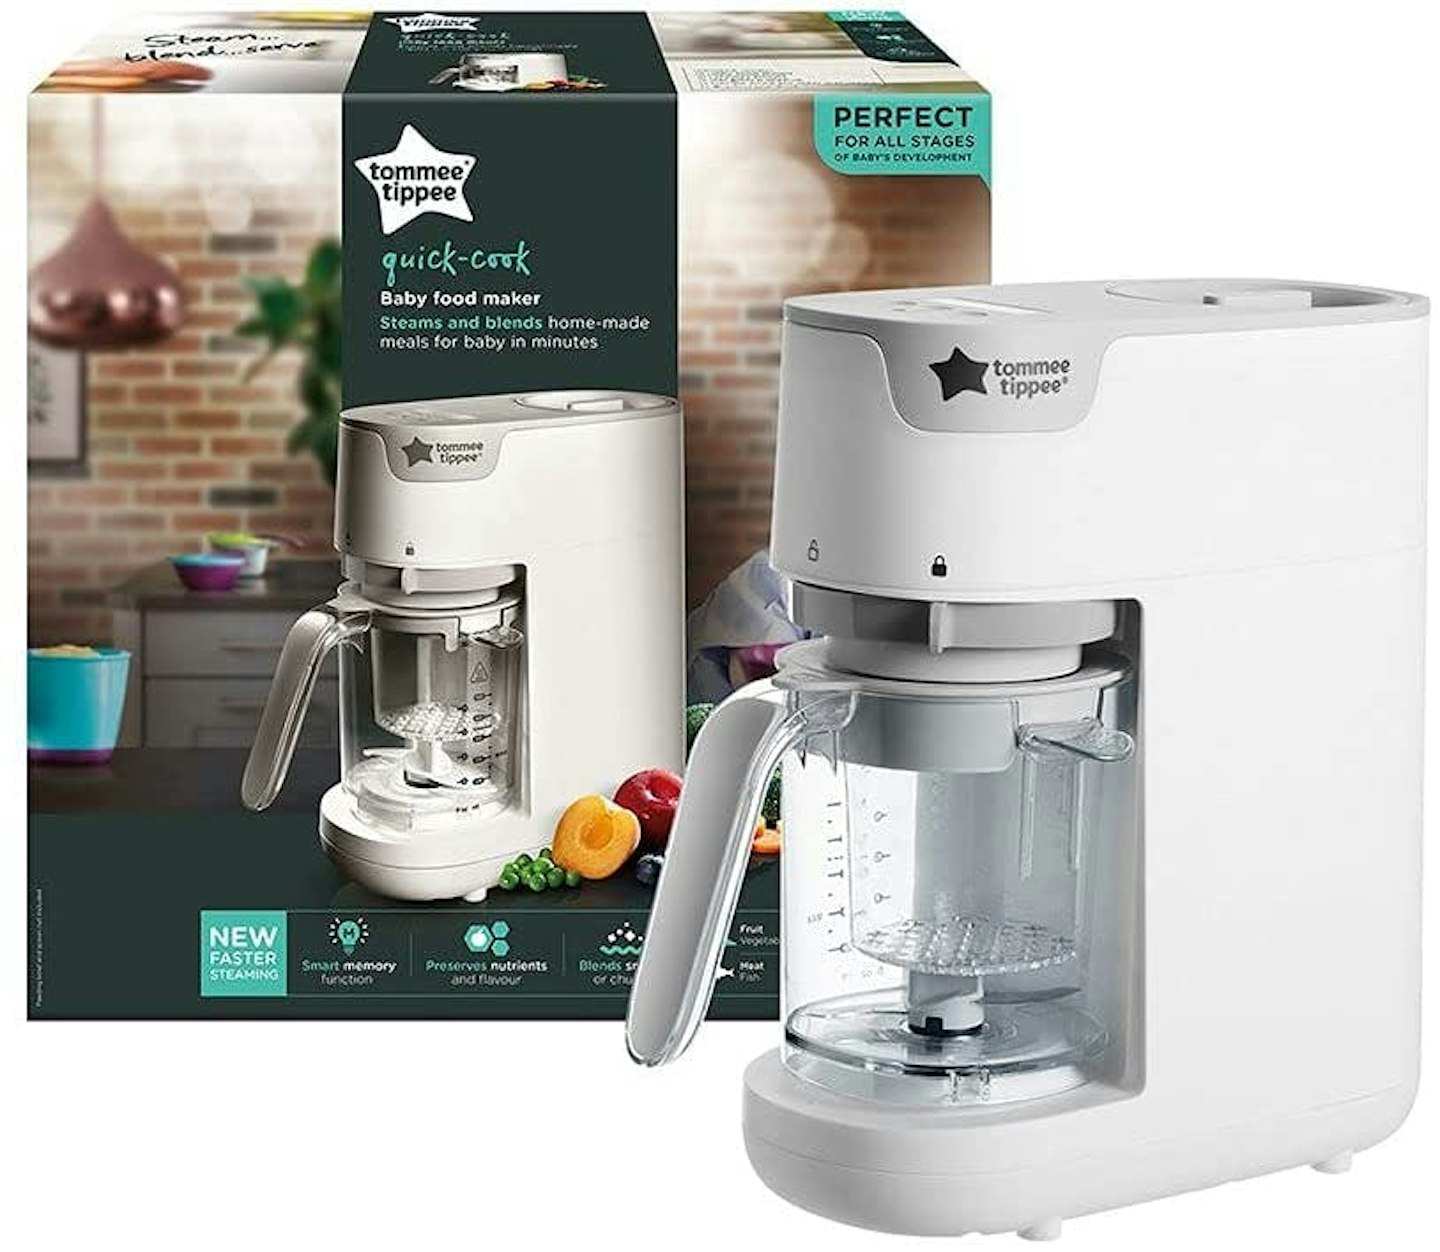 https://images.bauerhosting.com/affiliates/sites/12/2023/03/Tommee-Tippee-Quick-Cook-Baby-Food-Steamer-and-Blender.jpg?auto=format&w=1440&q=80